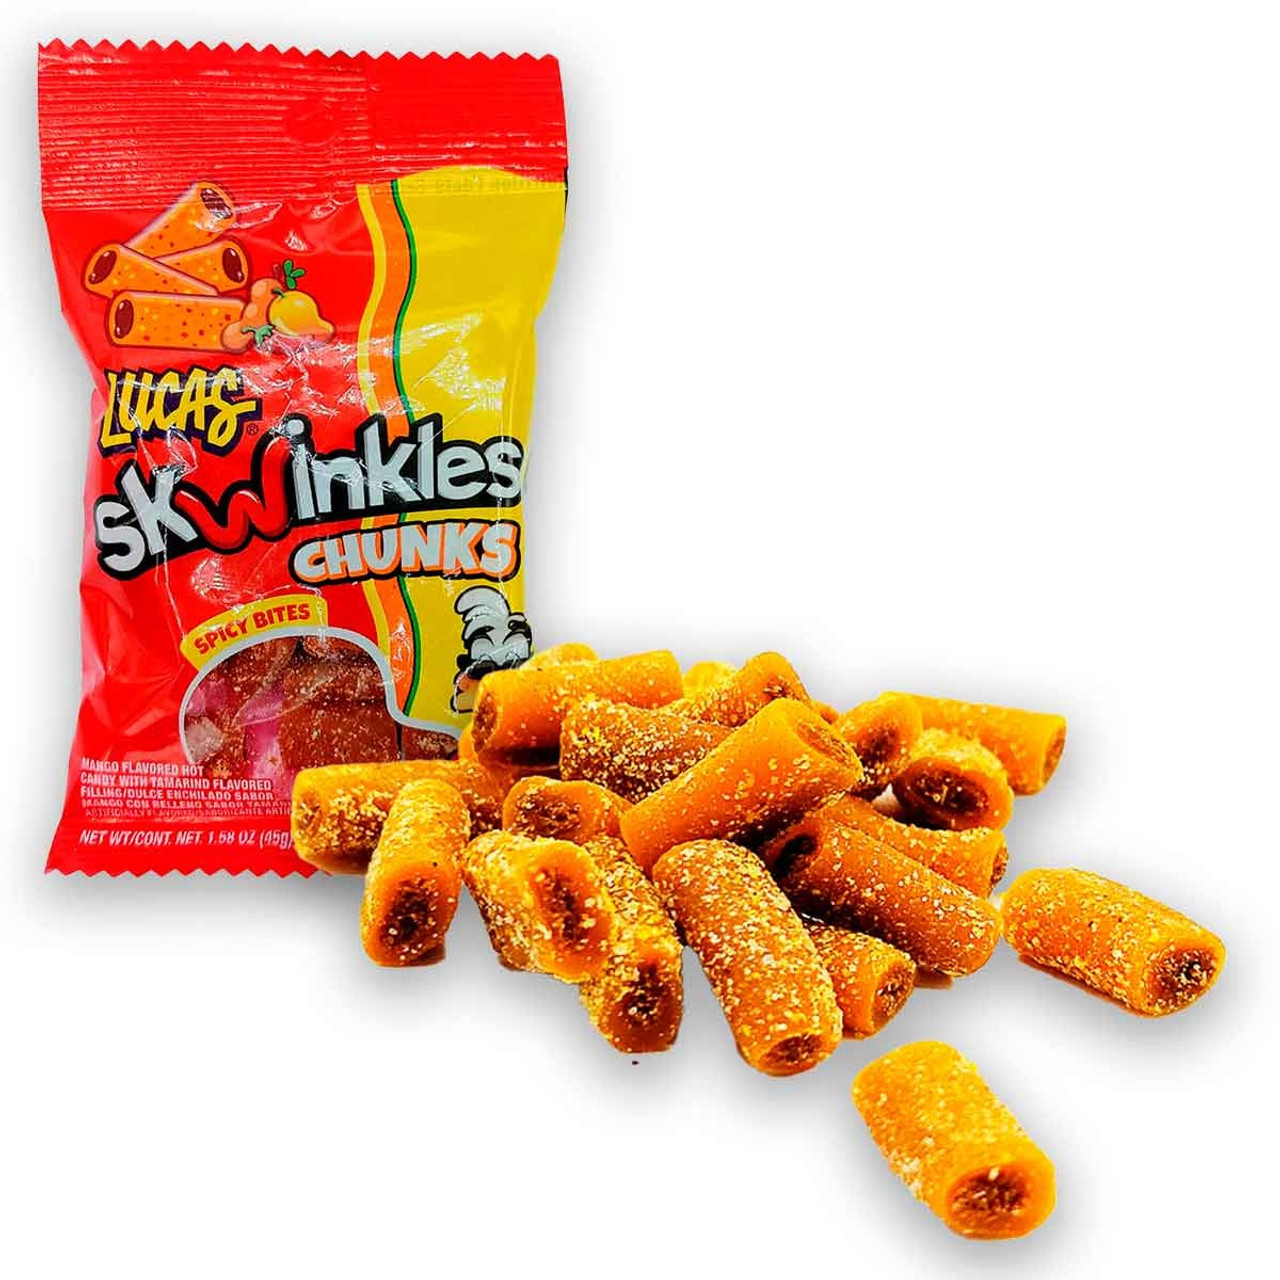 Lucas Skwinkles Mango Spicy Chunks 6-Pieces Pack